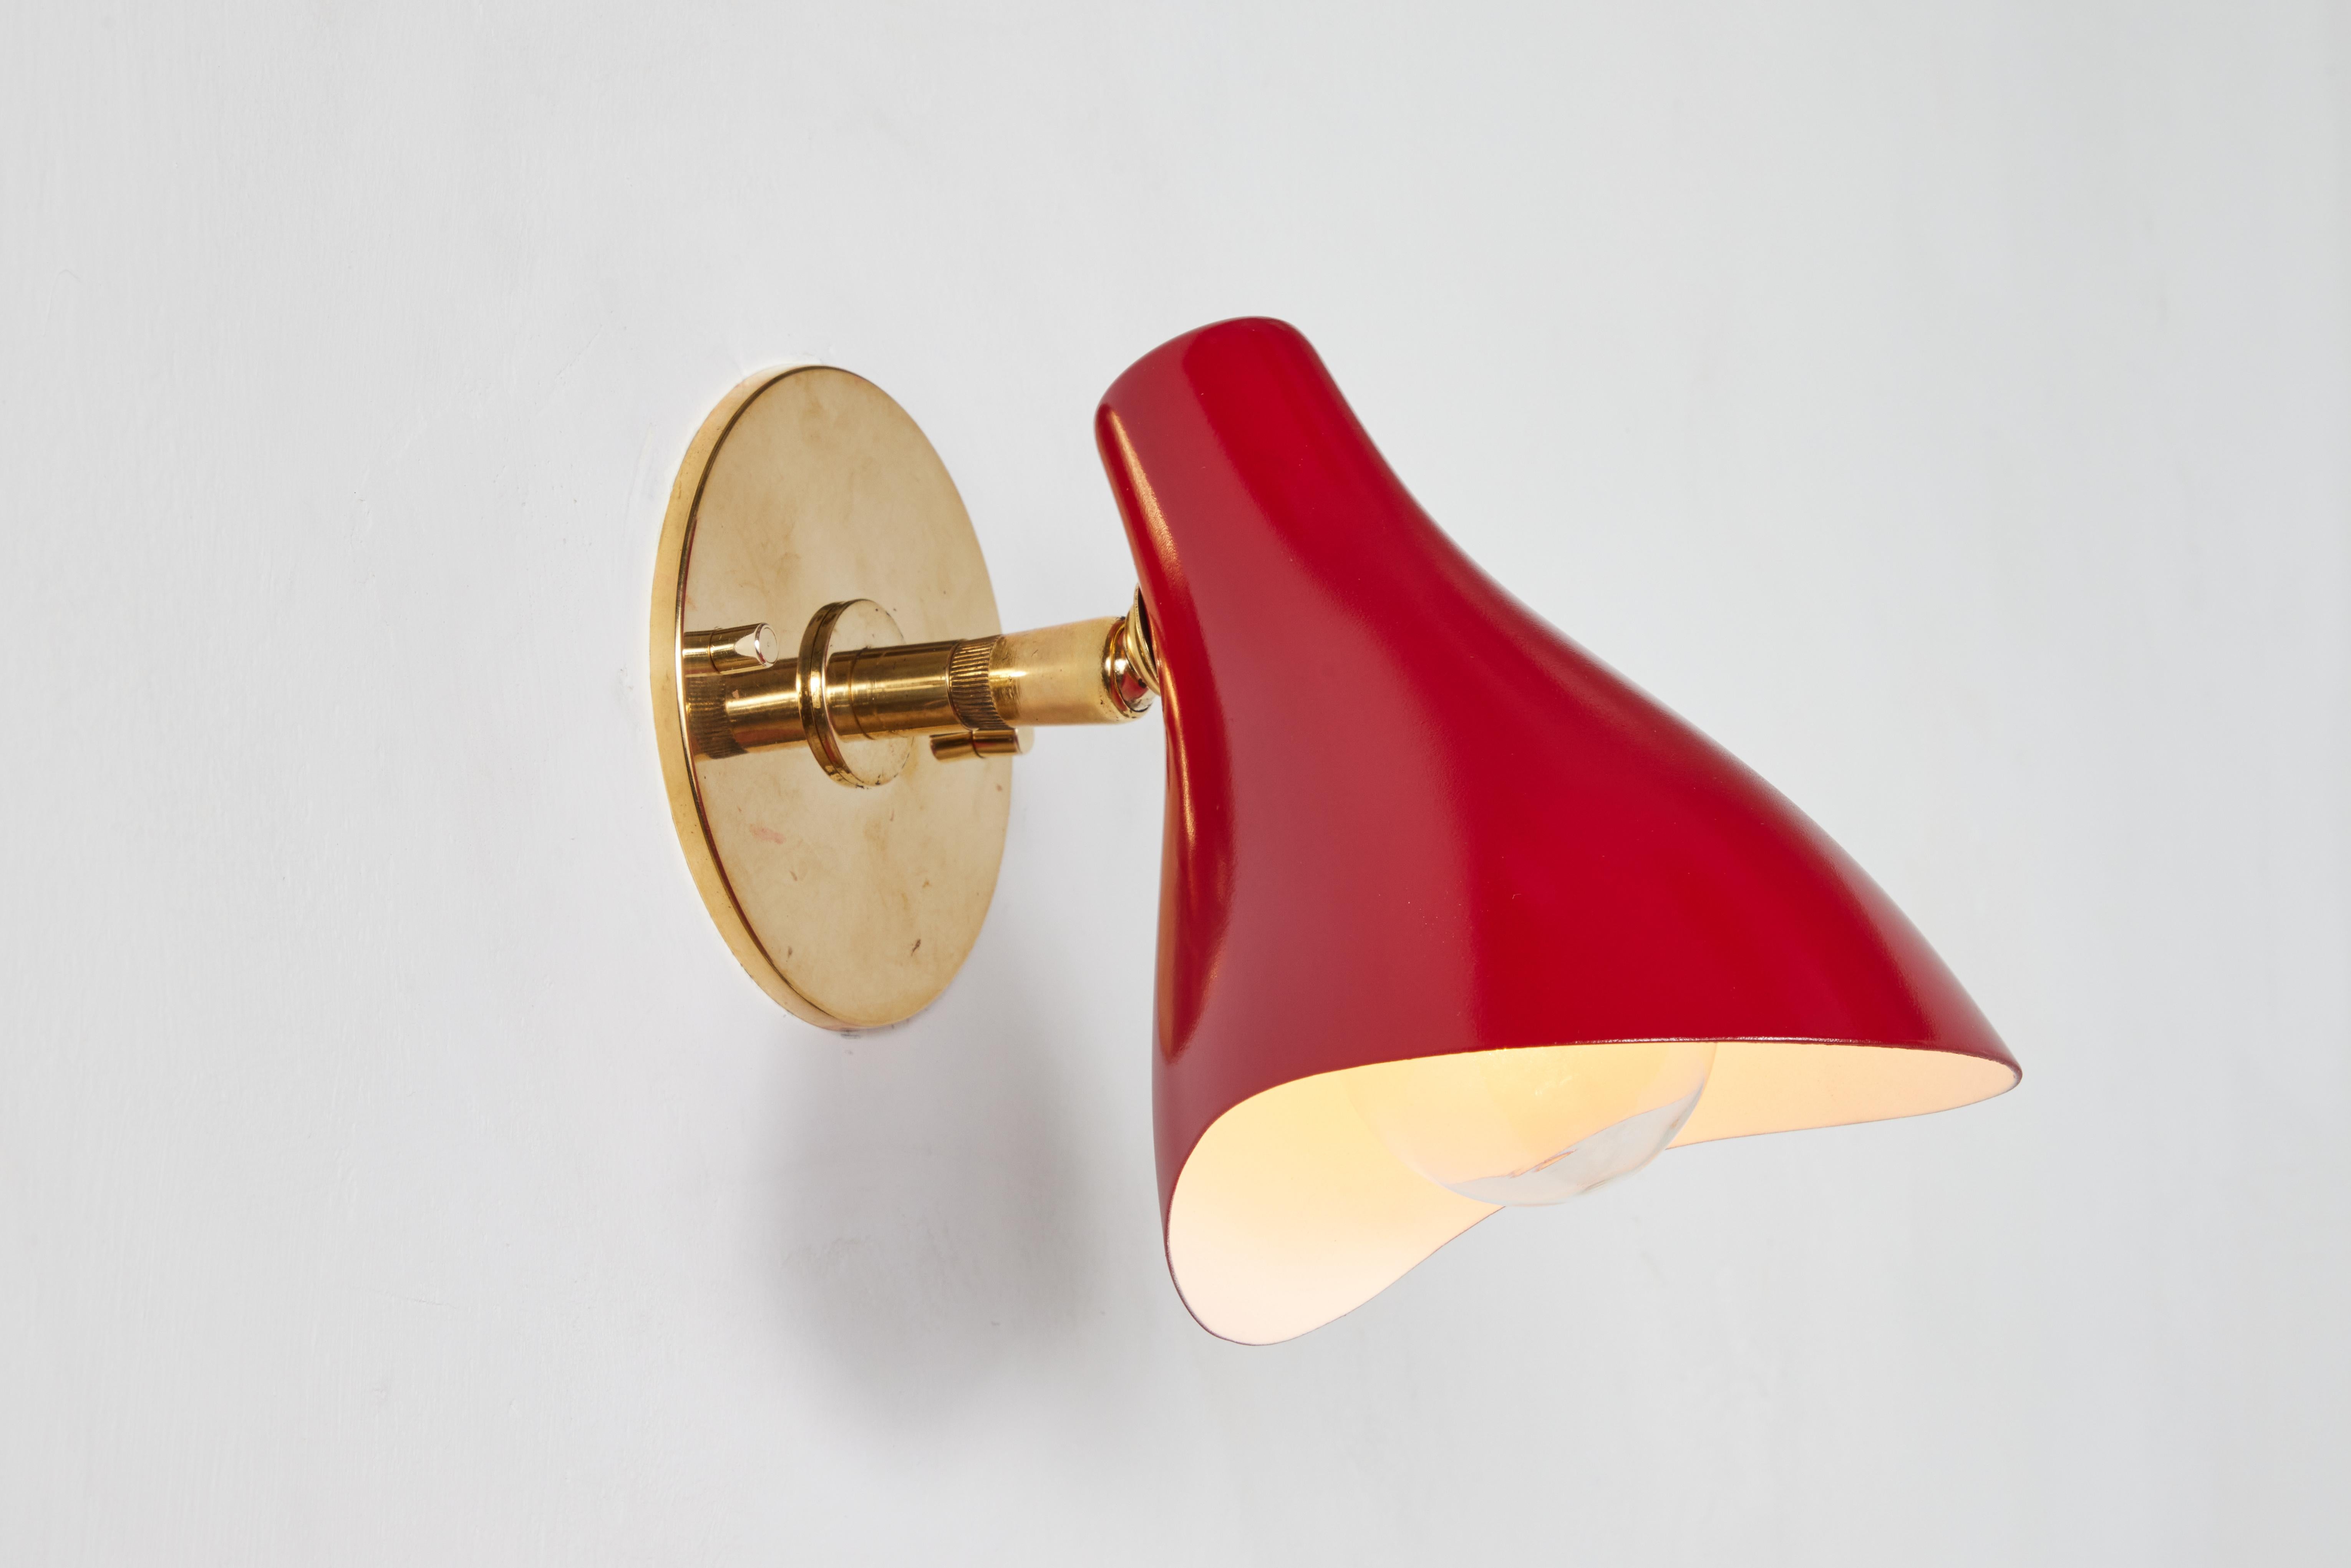 Pair of Gino Sarfatti Model #10 Sconces in Red for Arteluce For Sale 5